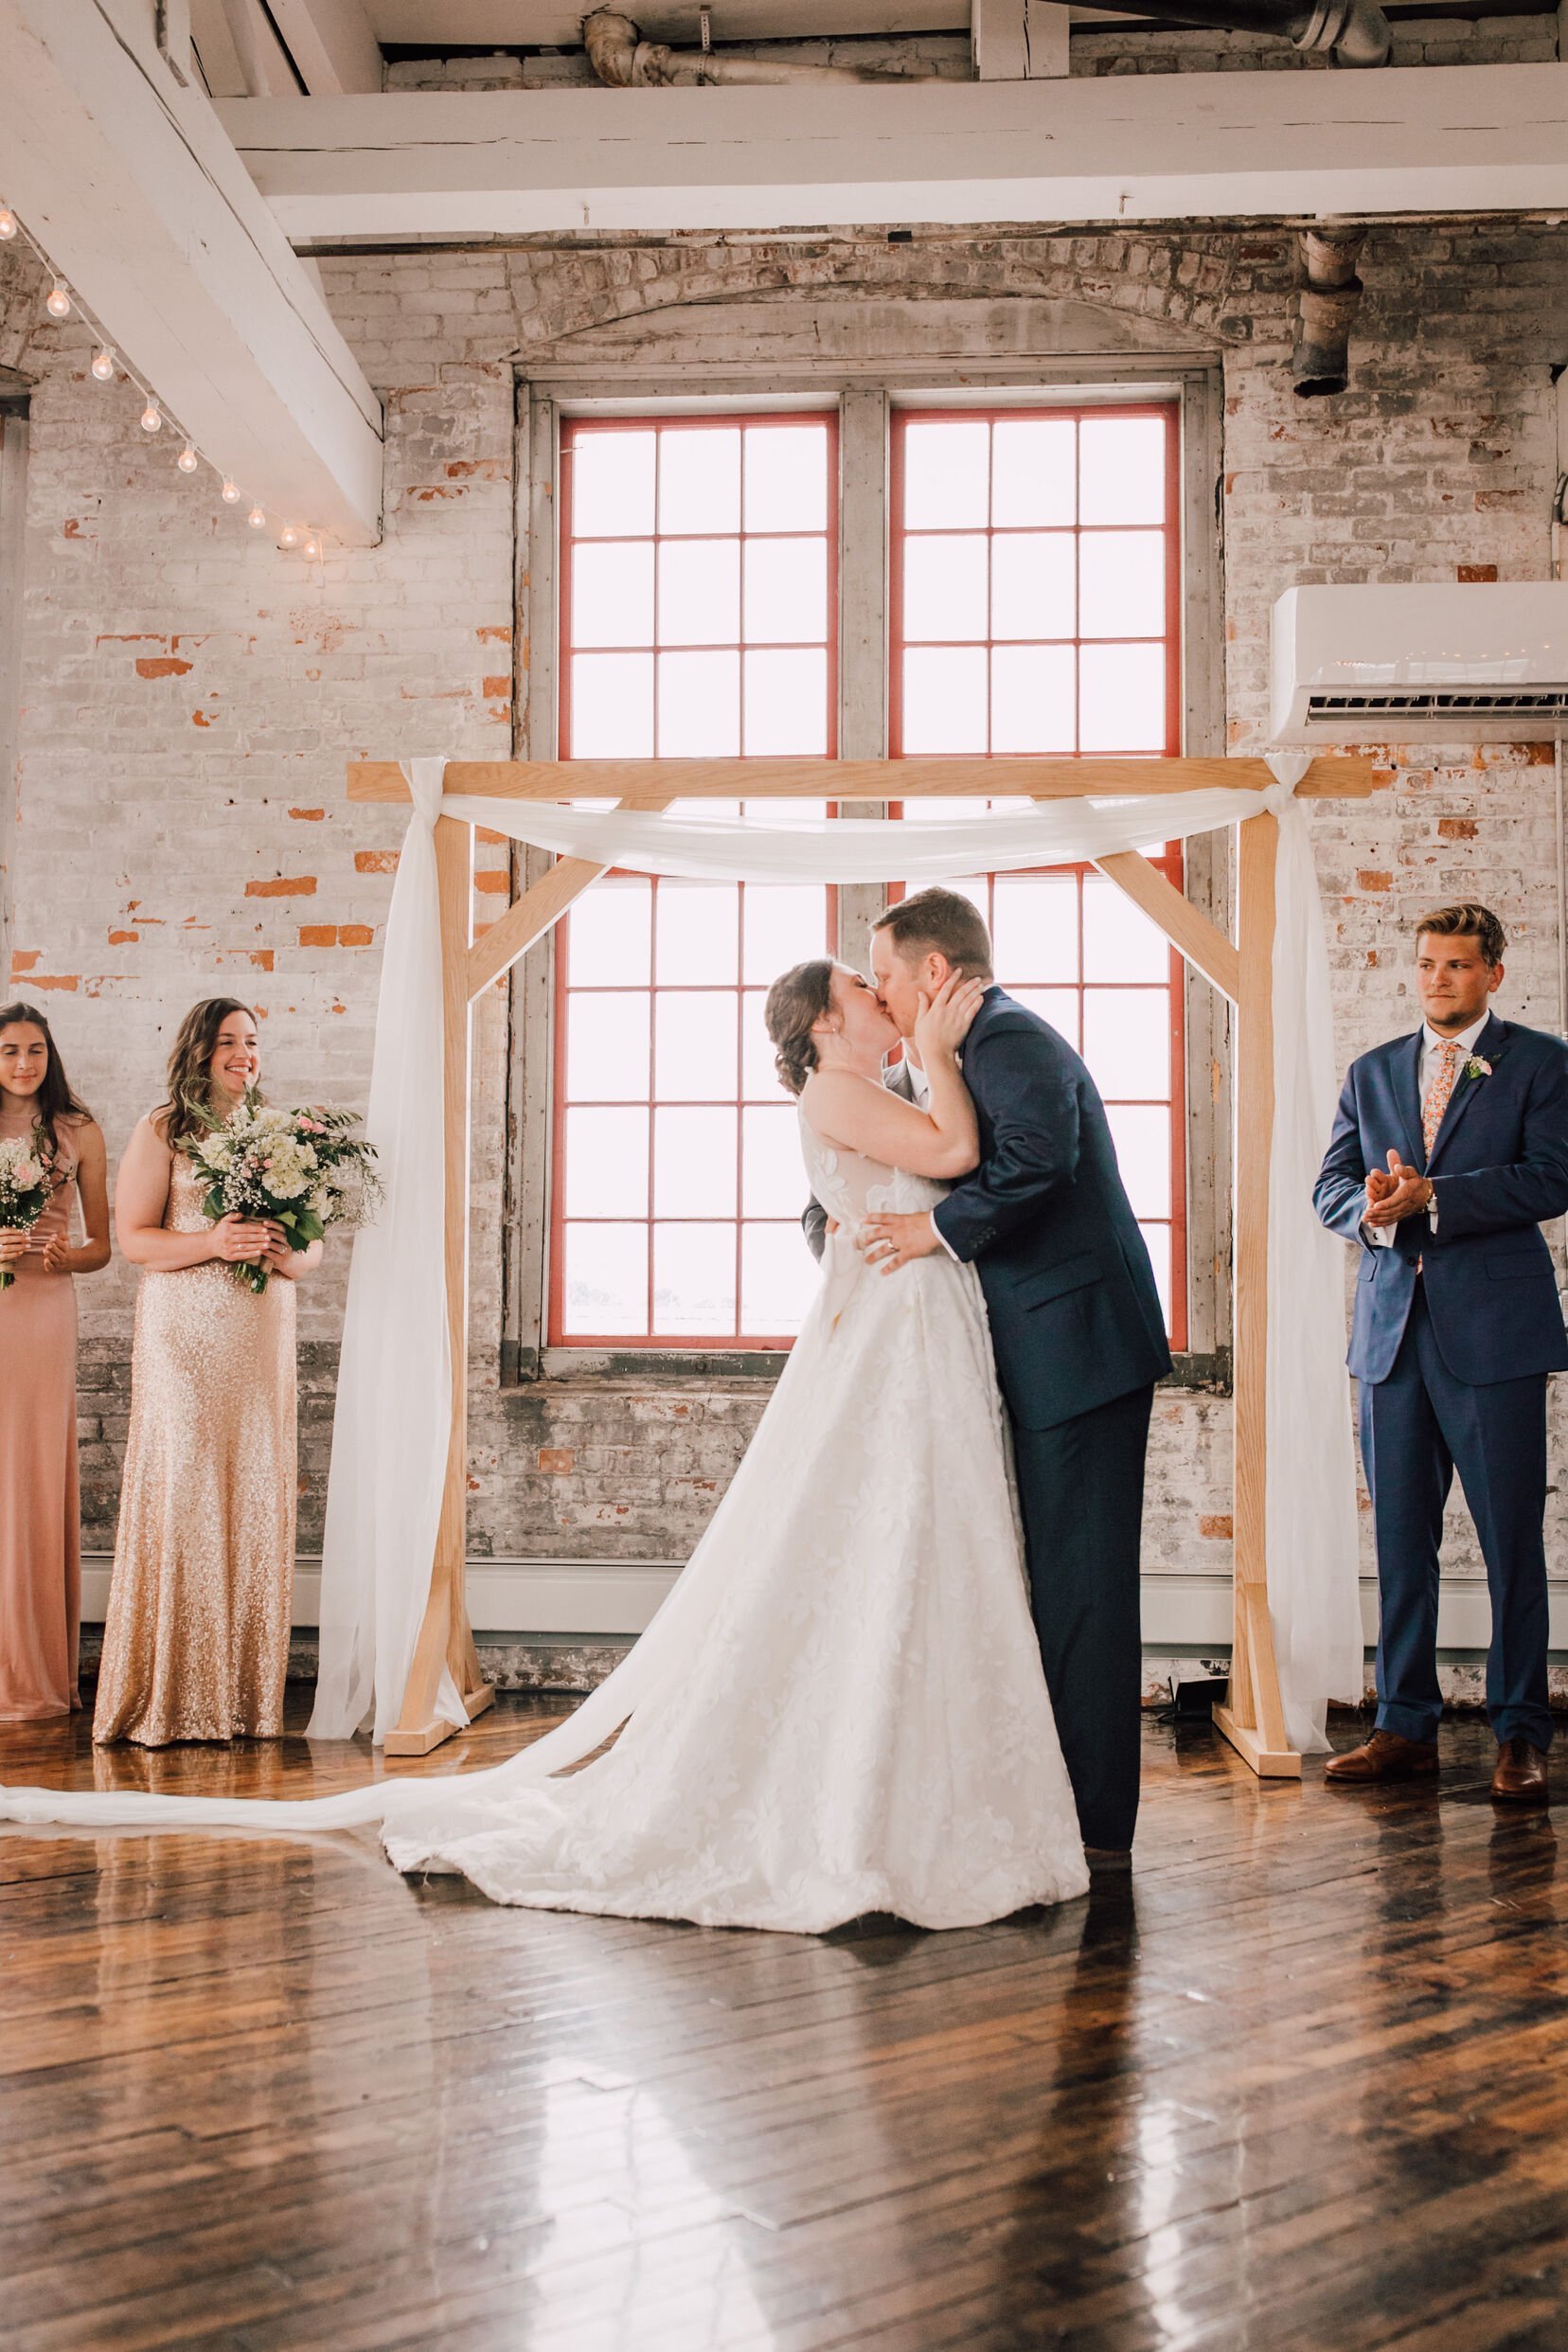  Bride and groom’ first kiss at their industrial wedding venue ceremony 